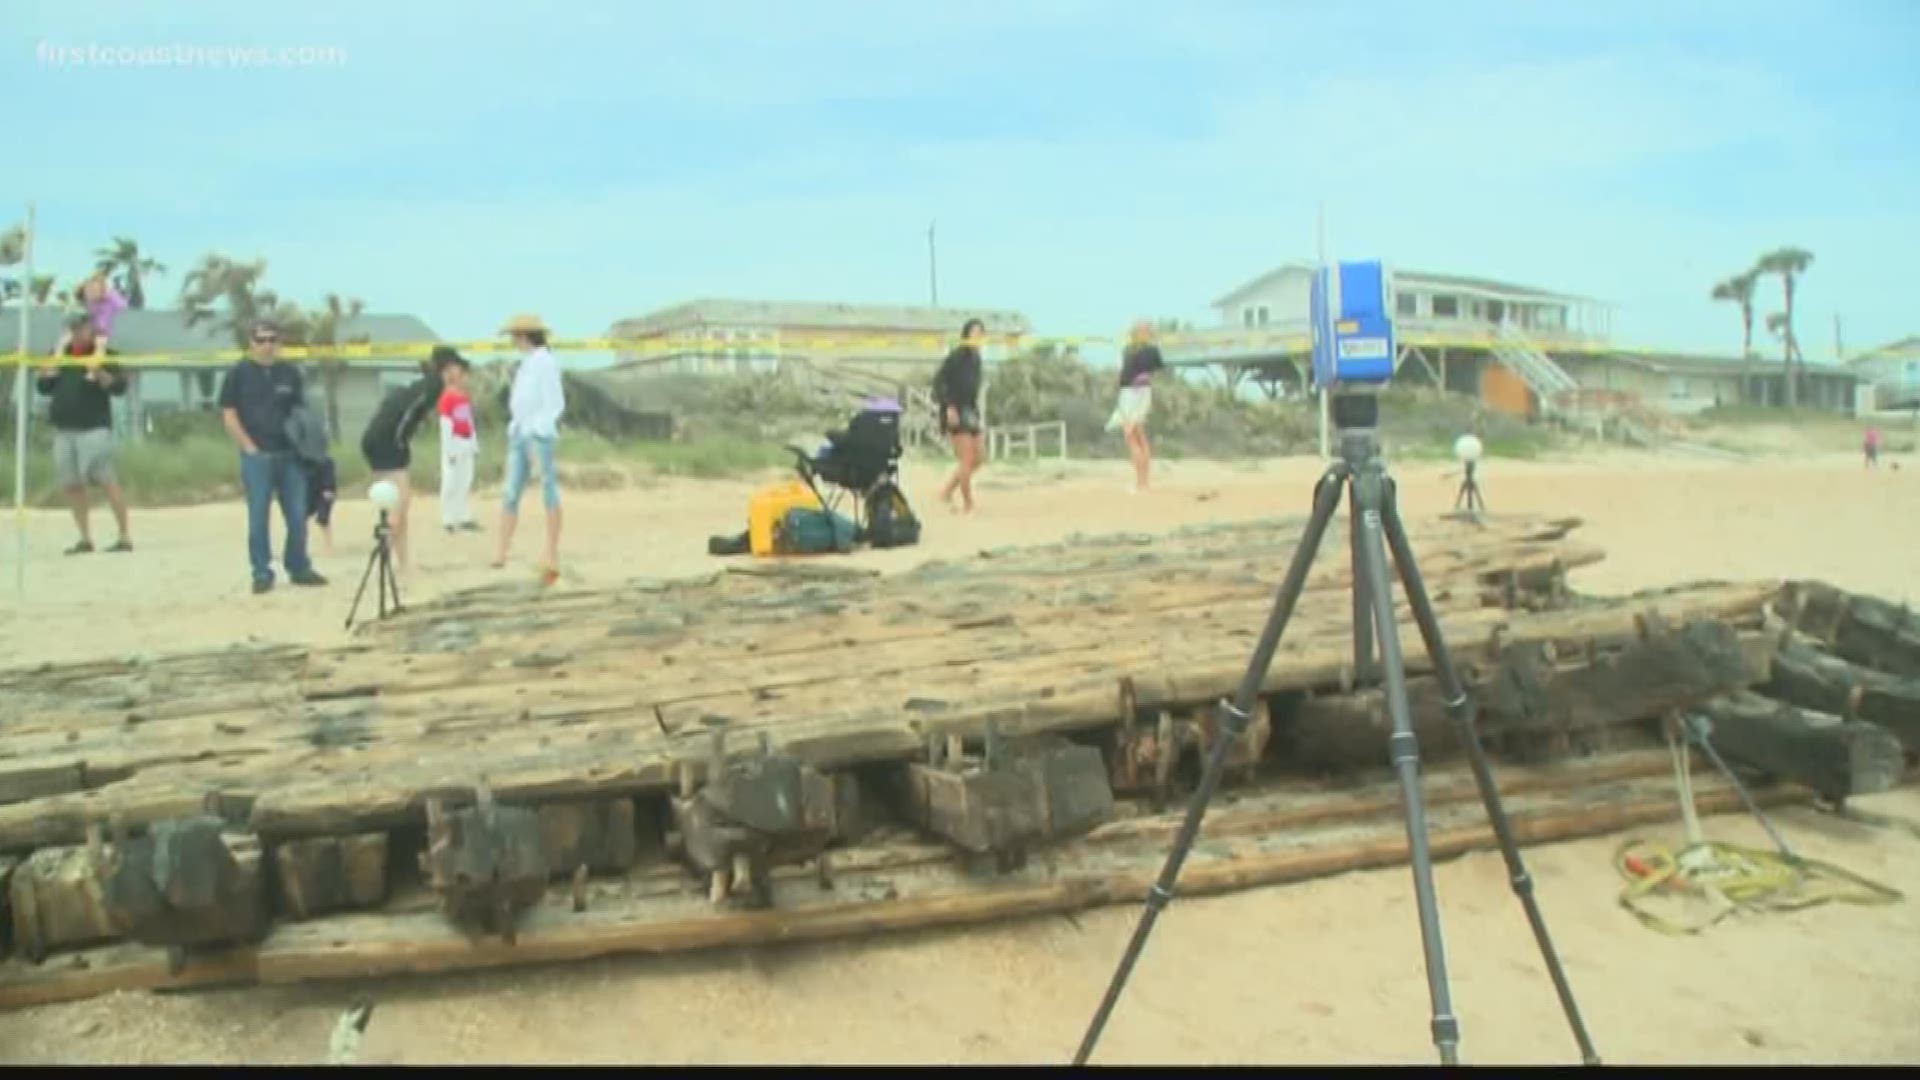 FCN's Shelby Danielsen explains how archaeologists are studying a ship that washed ashore in Ponte Vedra Beach.